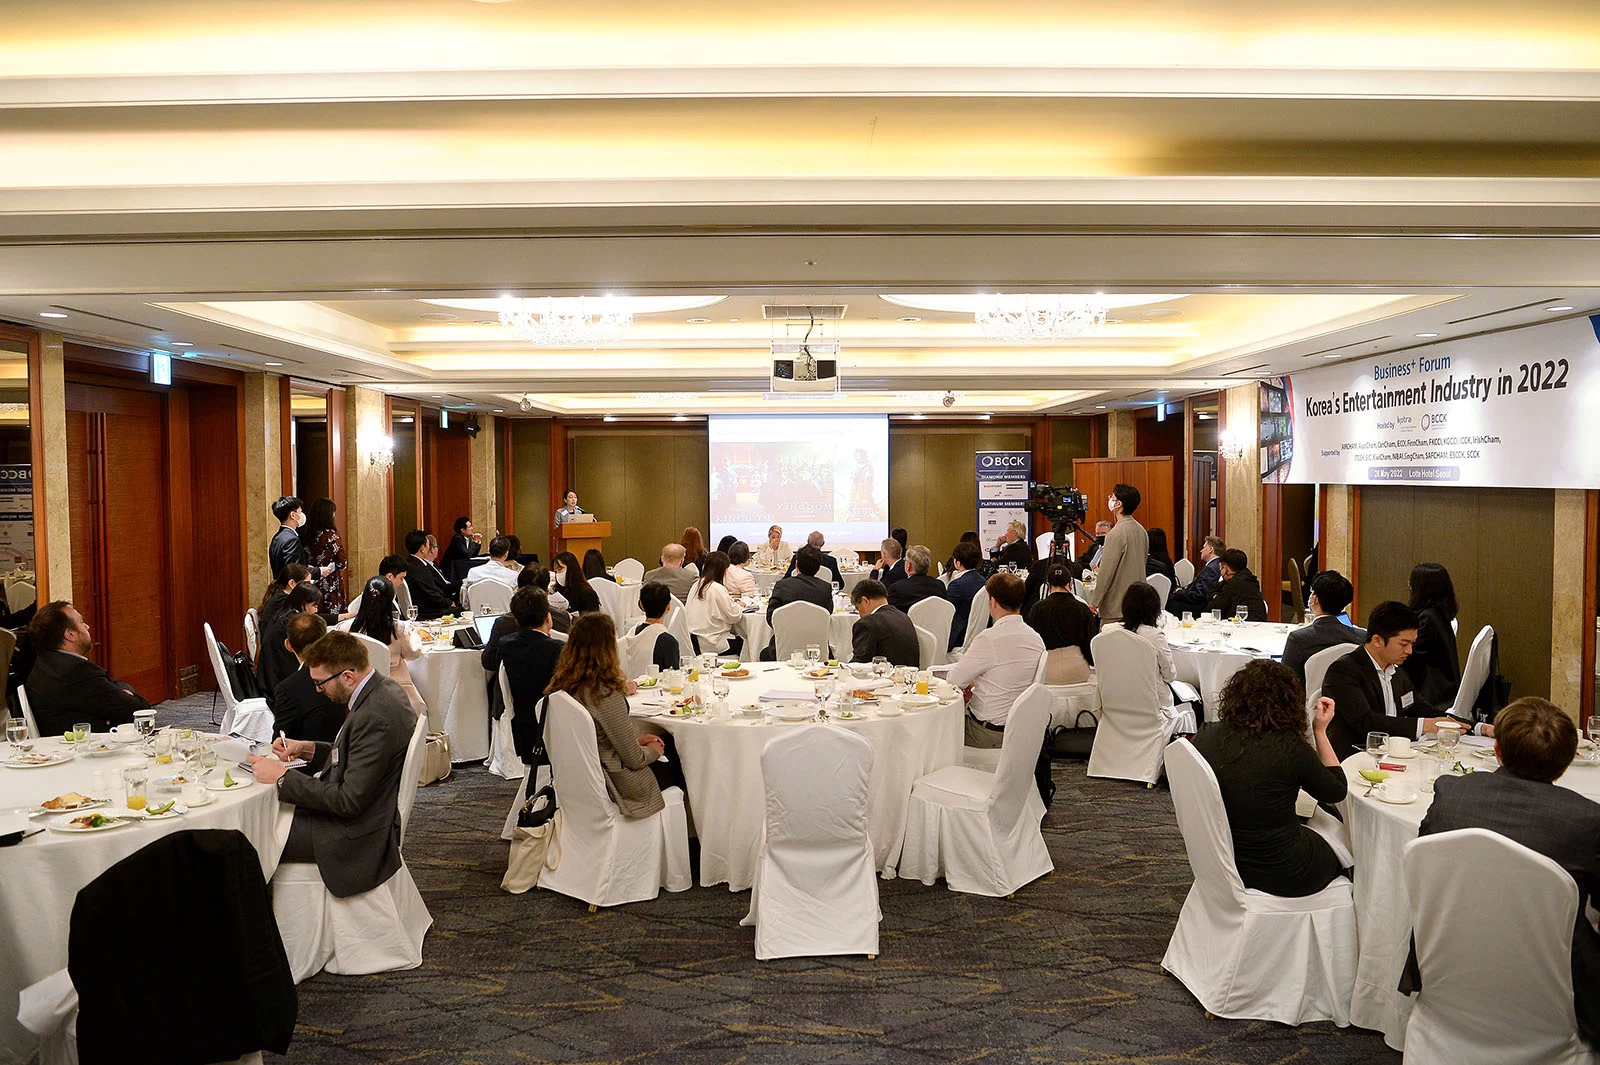 3rd Business+ Forum Event - The growing influence of Korean entertainment industry globally | SingCham Korea